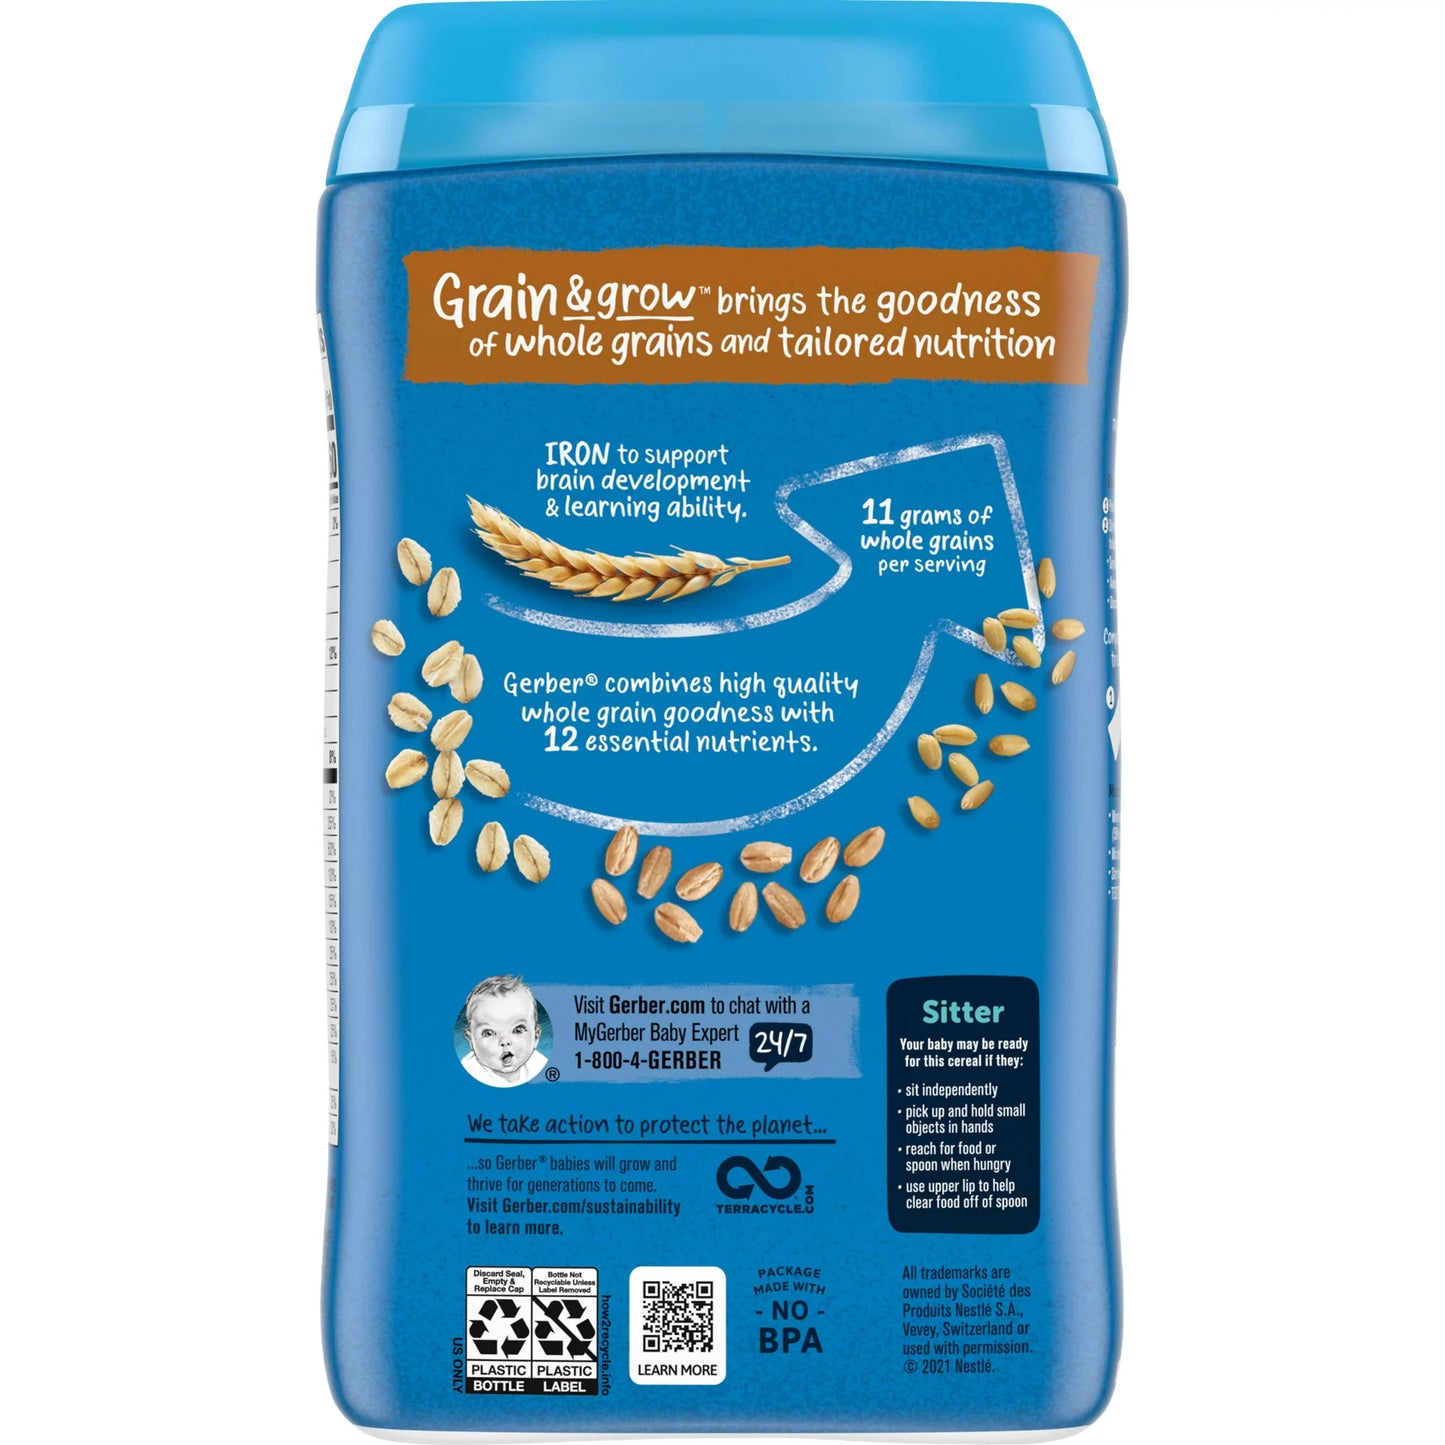 Gerber 2nd Foods Cereal for Baby Grain & Grow Baby Cereal, Multigrain, 16 oz Canister